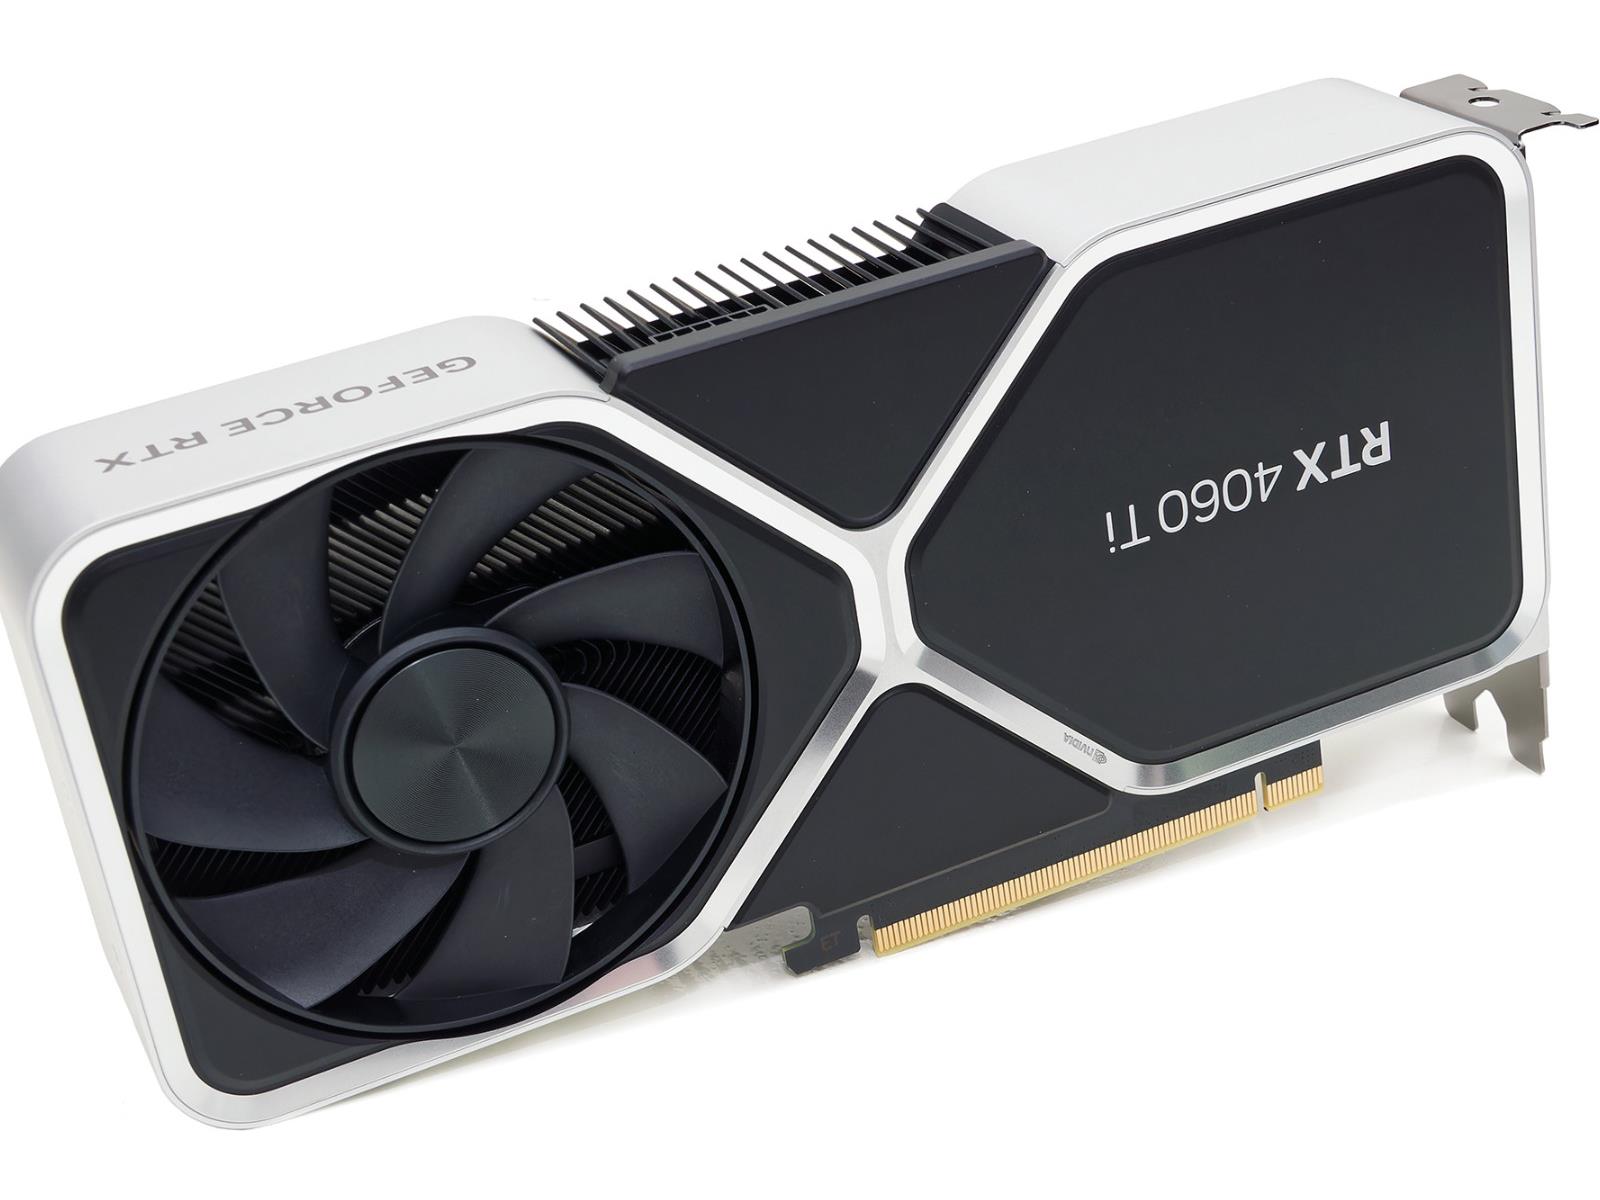 NVIDIA GeForce RTX 4060 Ti rumored to cost $399 (8GB) and $499